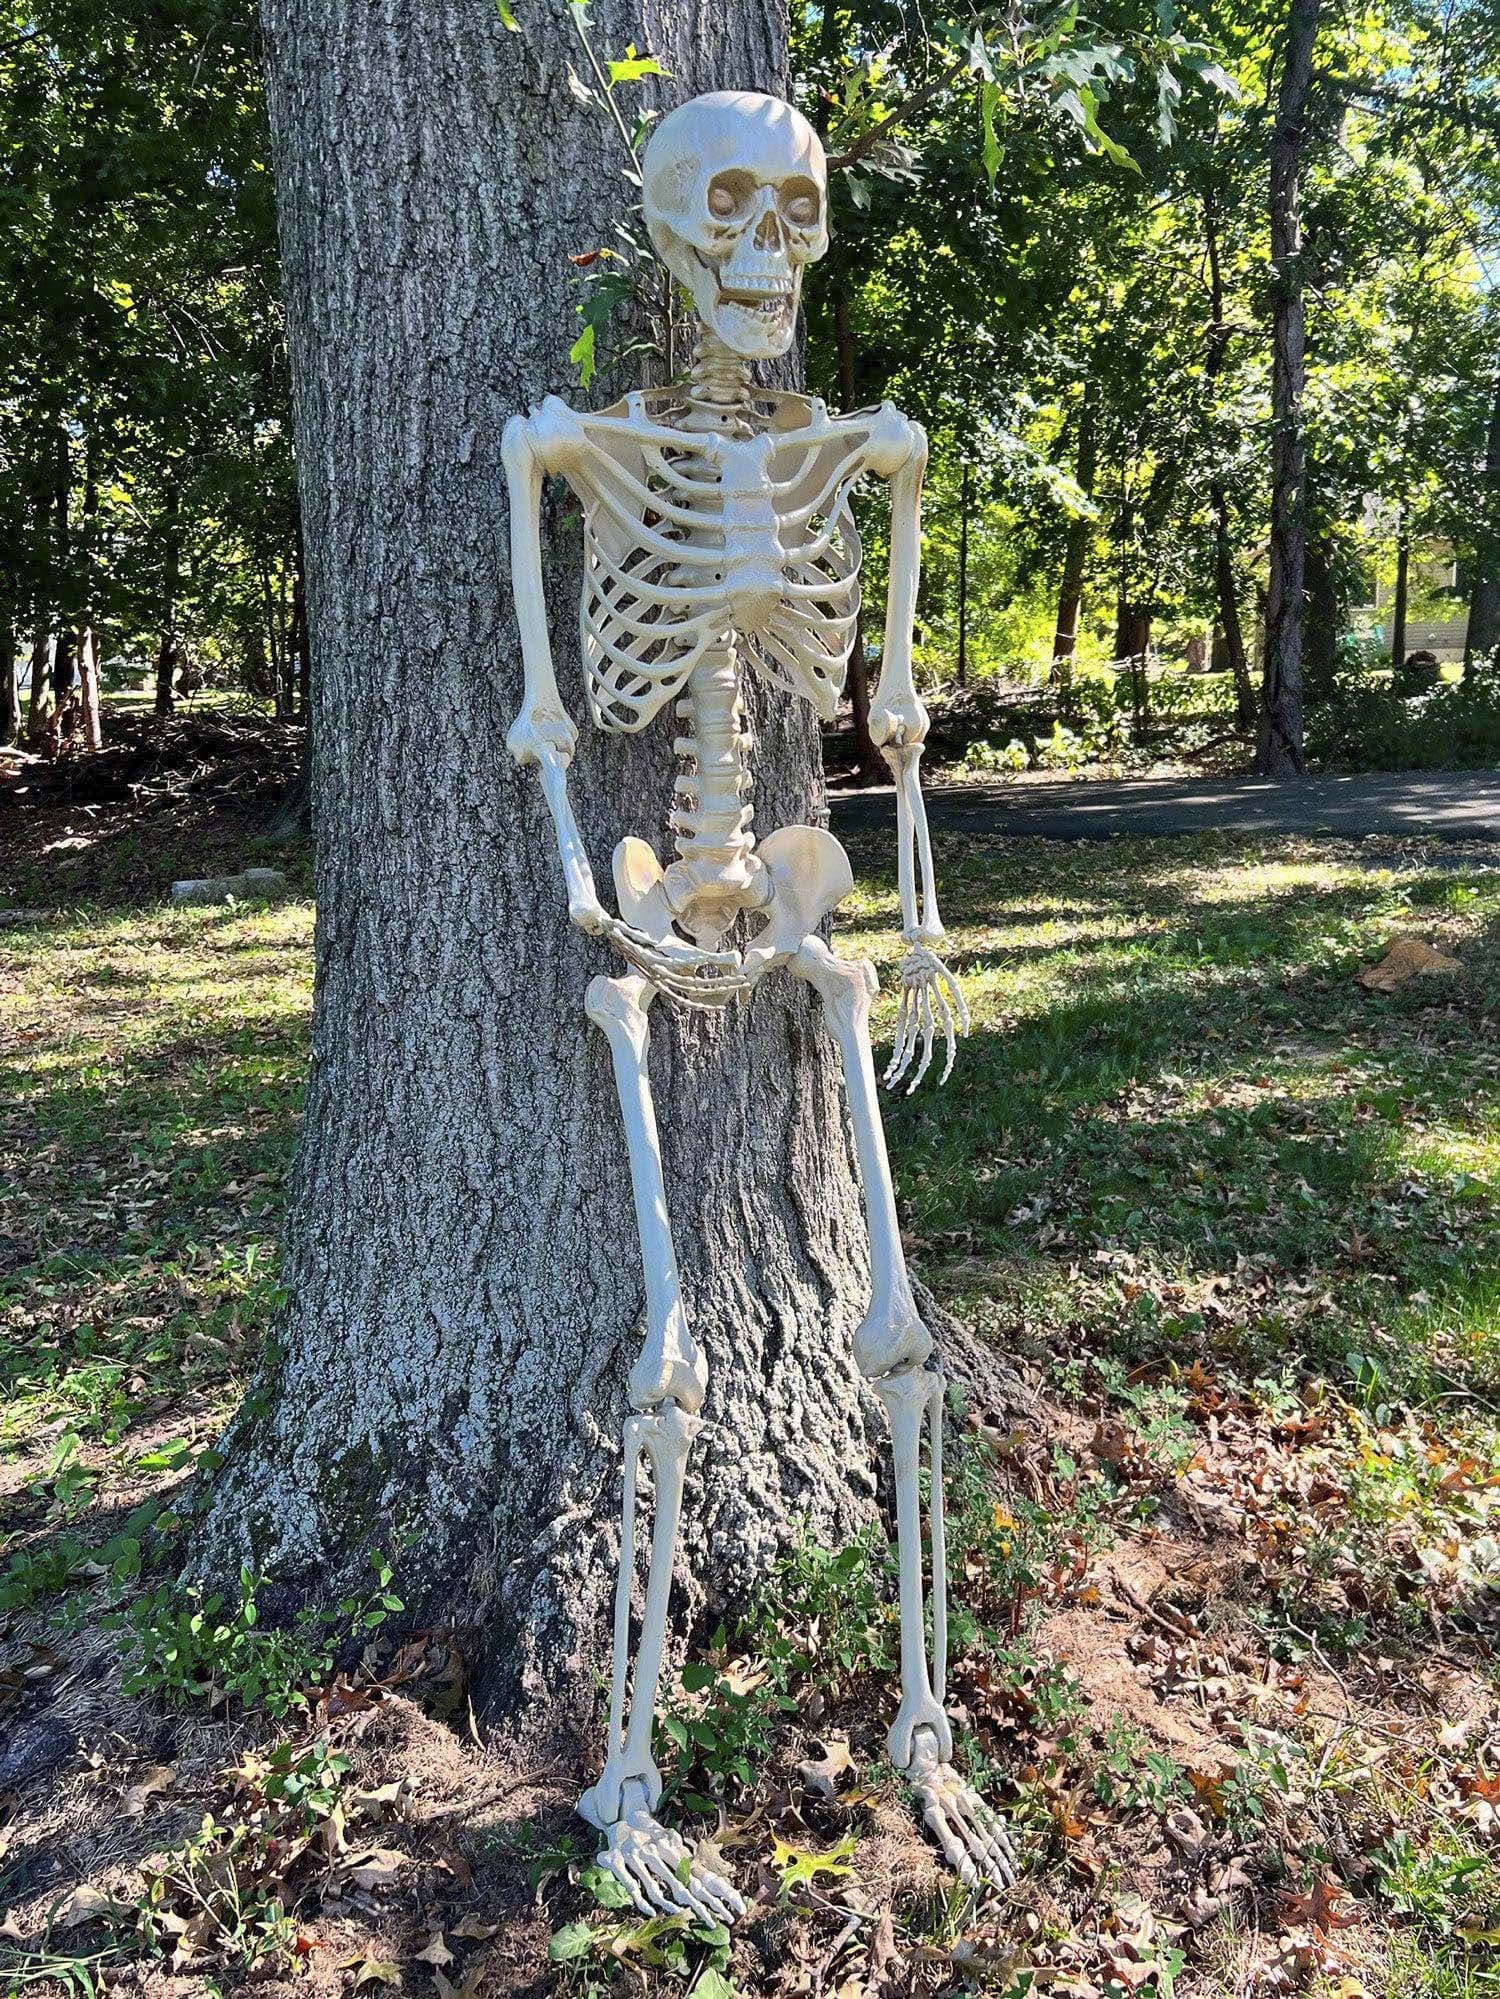 60-inch Posable Skeleton - costumes.com